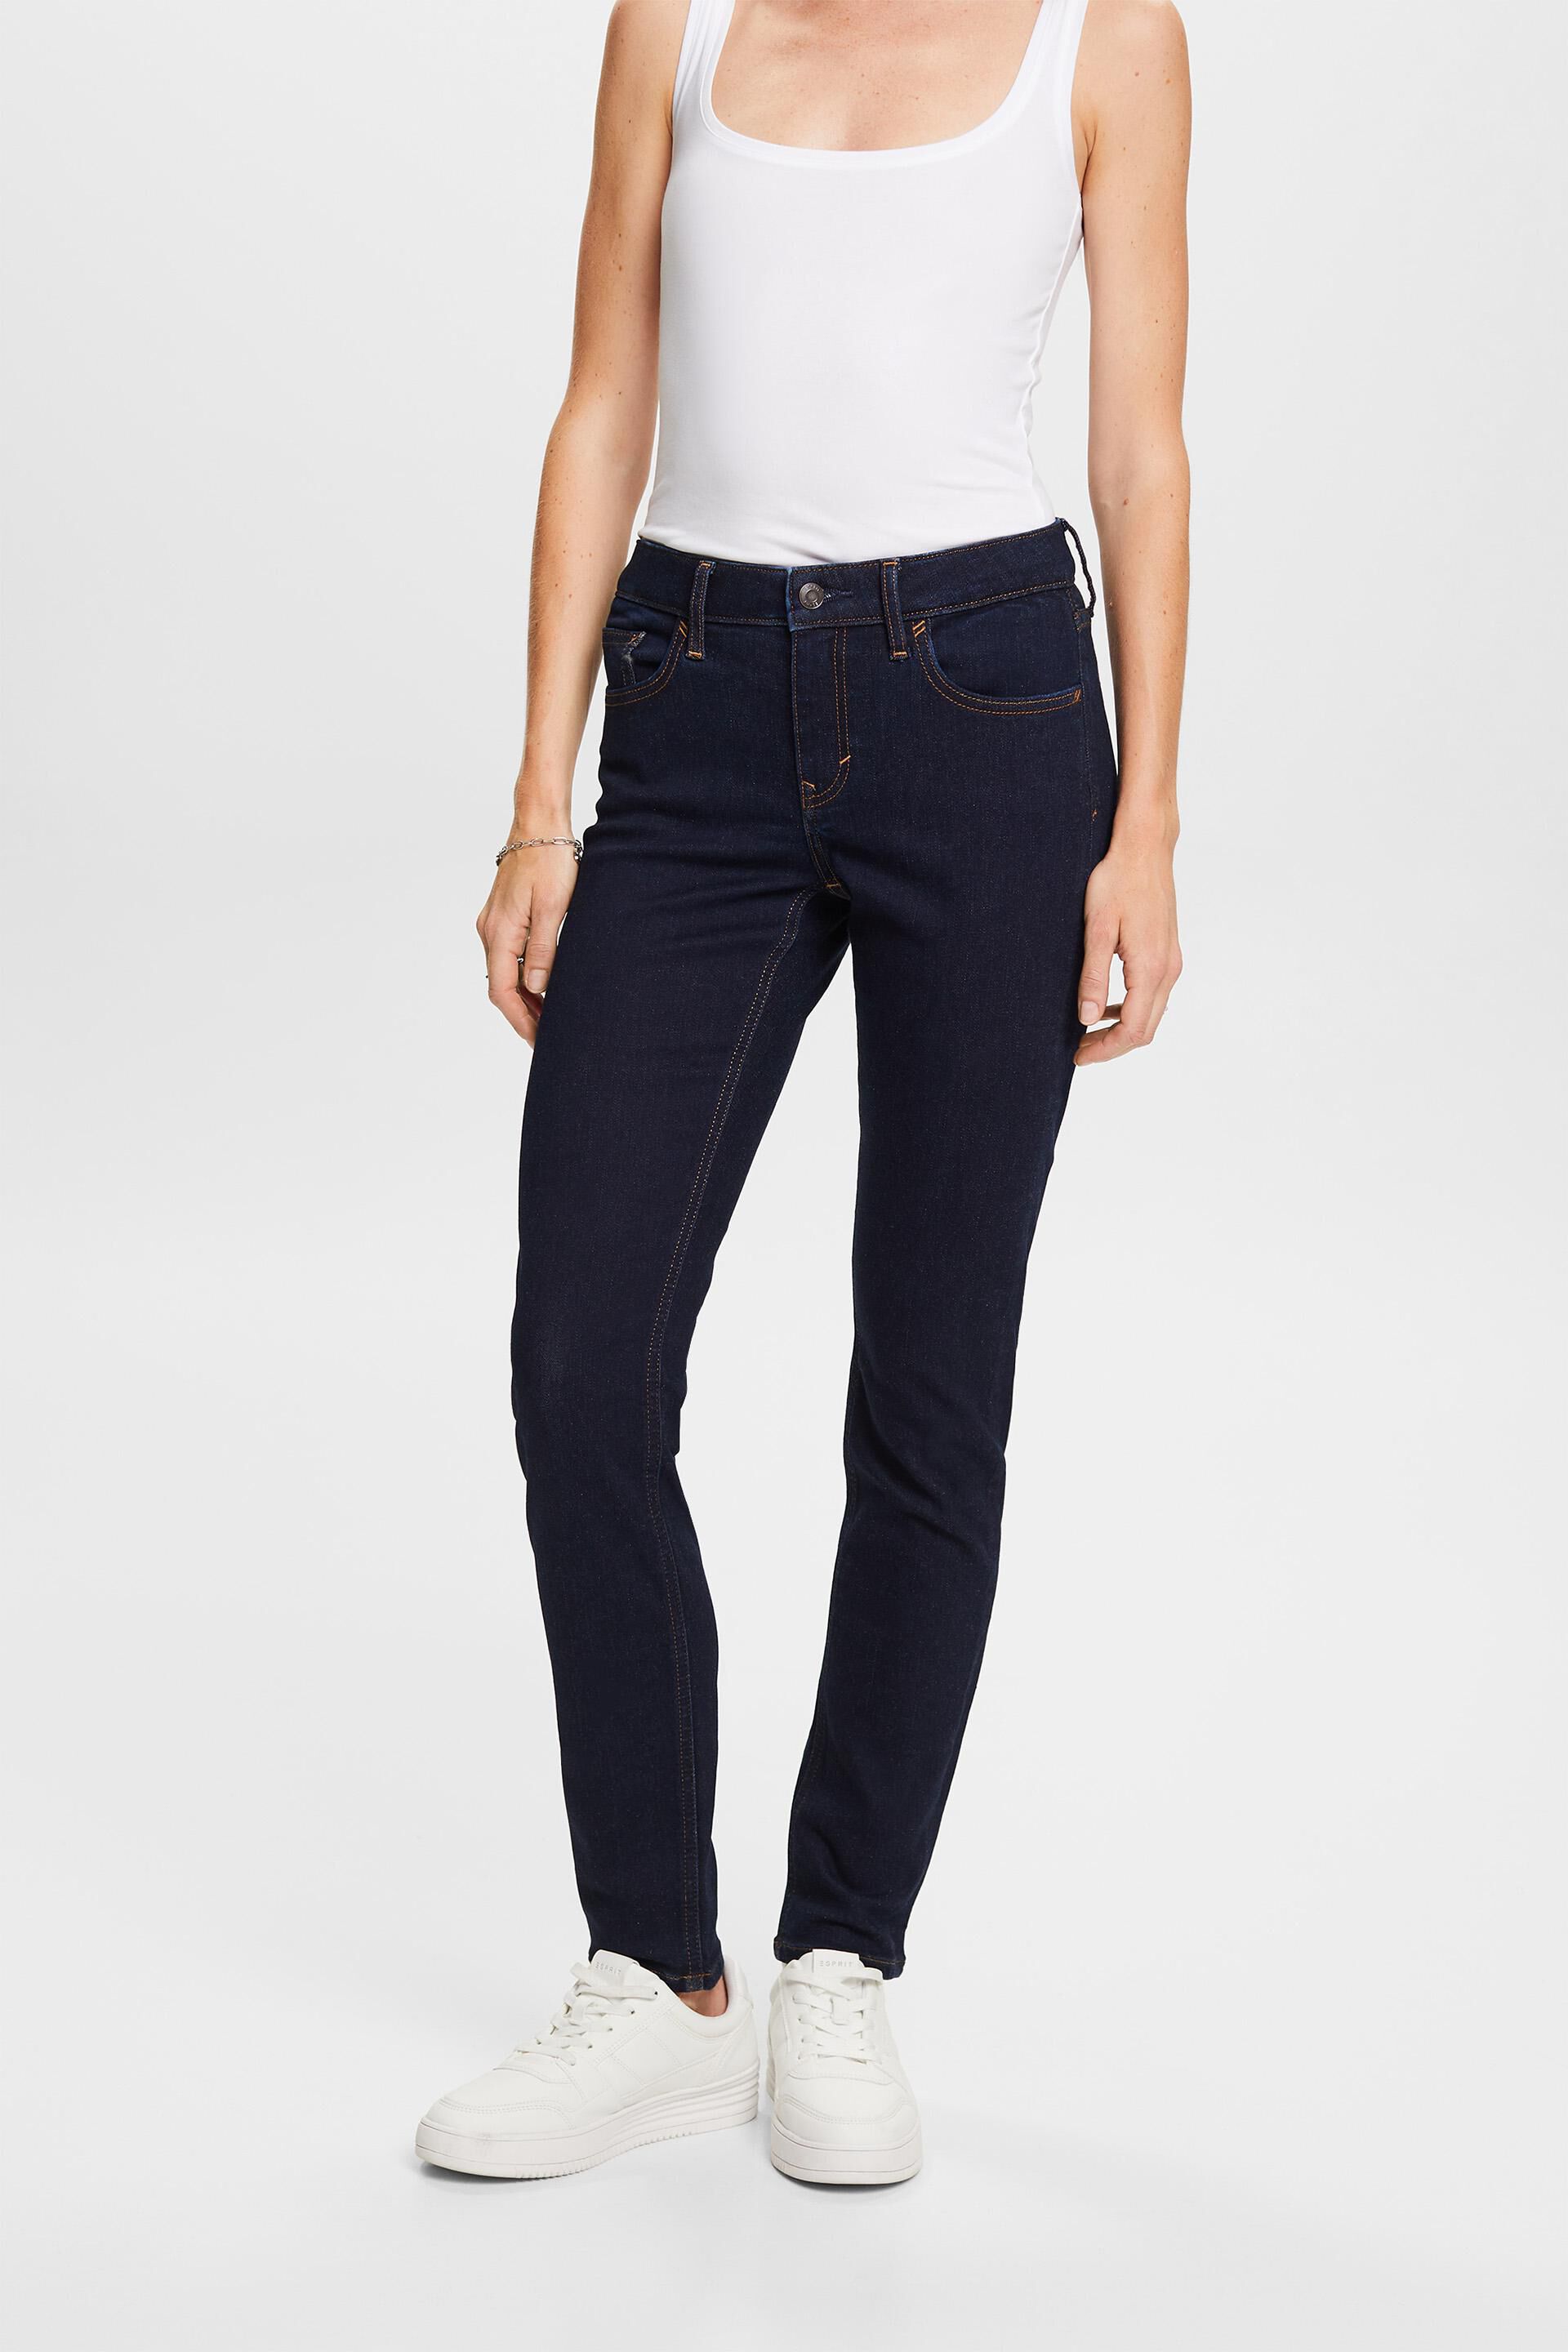 Esprit Recycled: jeans stretch slim fit mid-rise